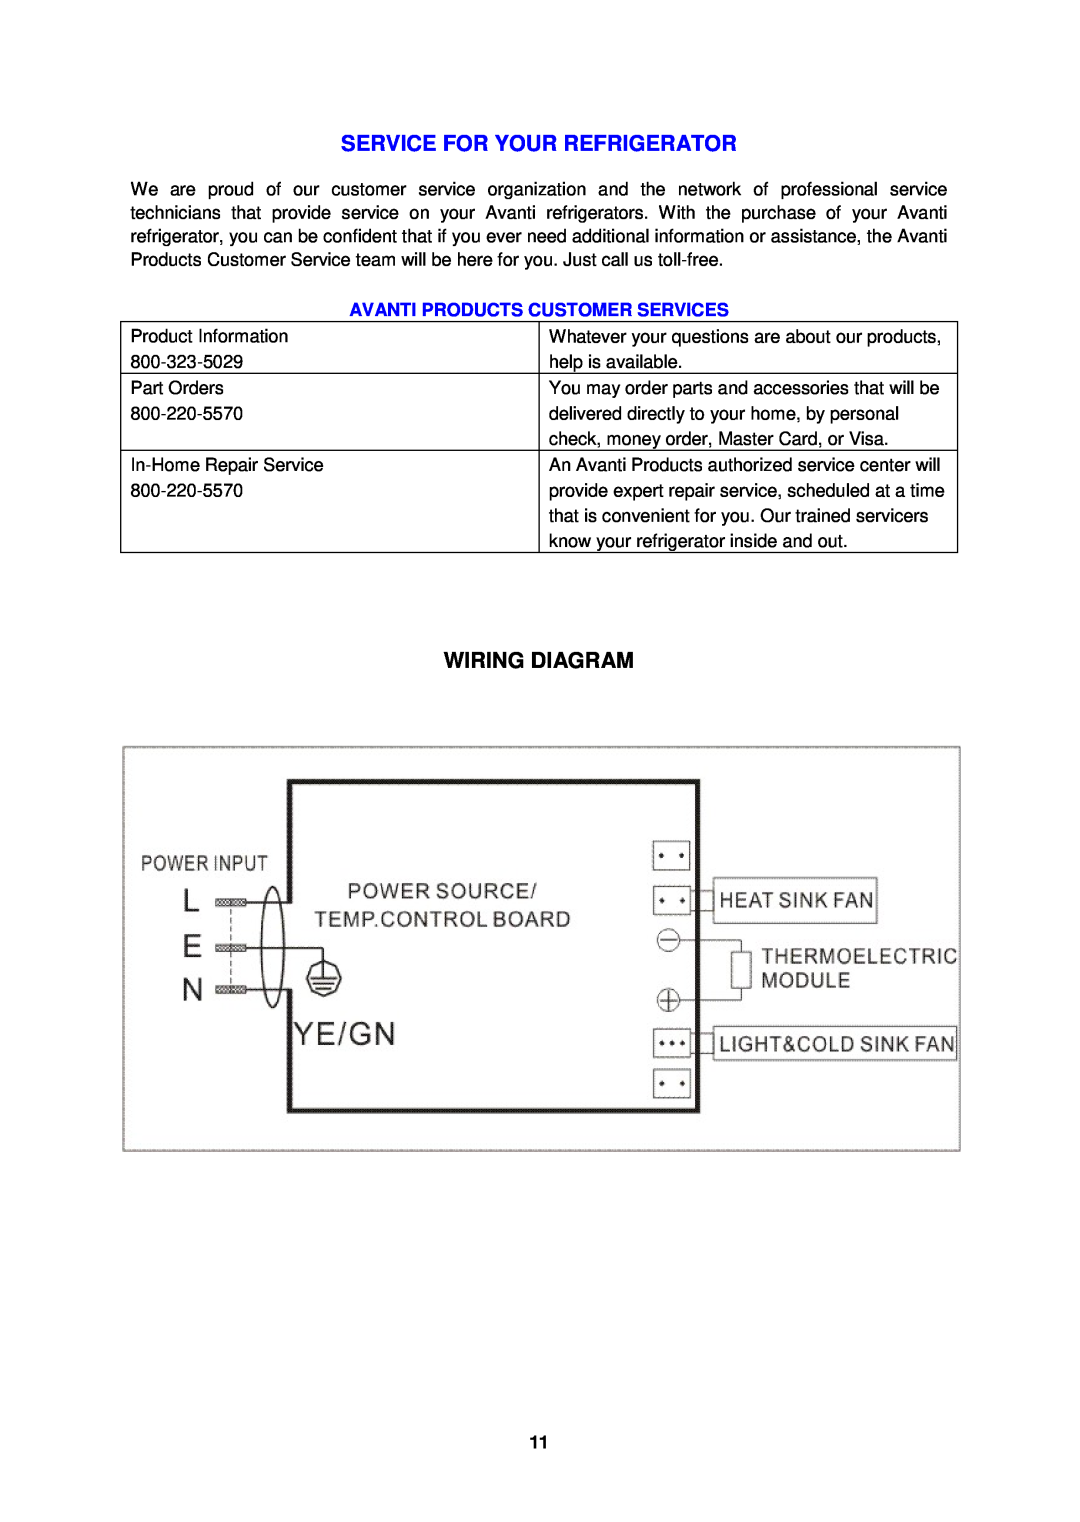 Avanti EC152BH instruction manual Service For Your Refrigerator, Wiring Diagram, Avanti Products Customer Services 